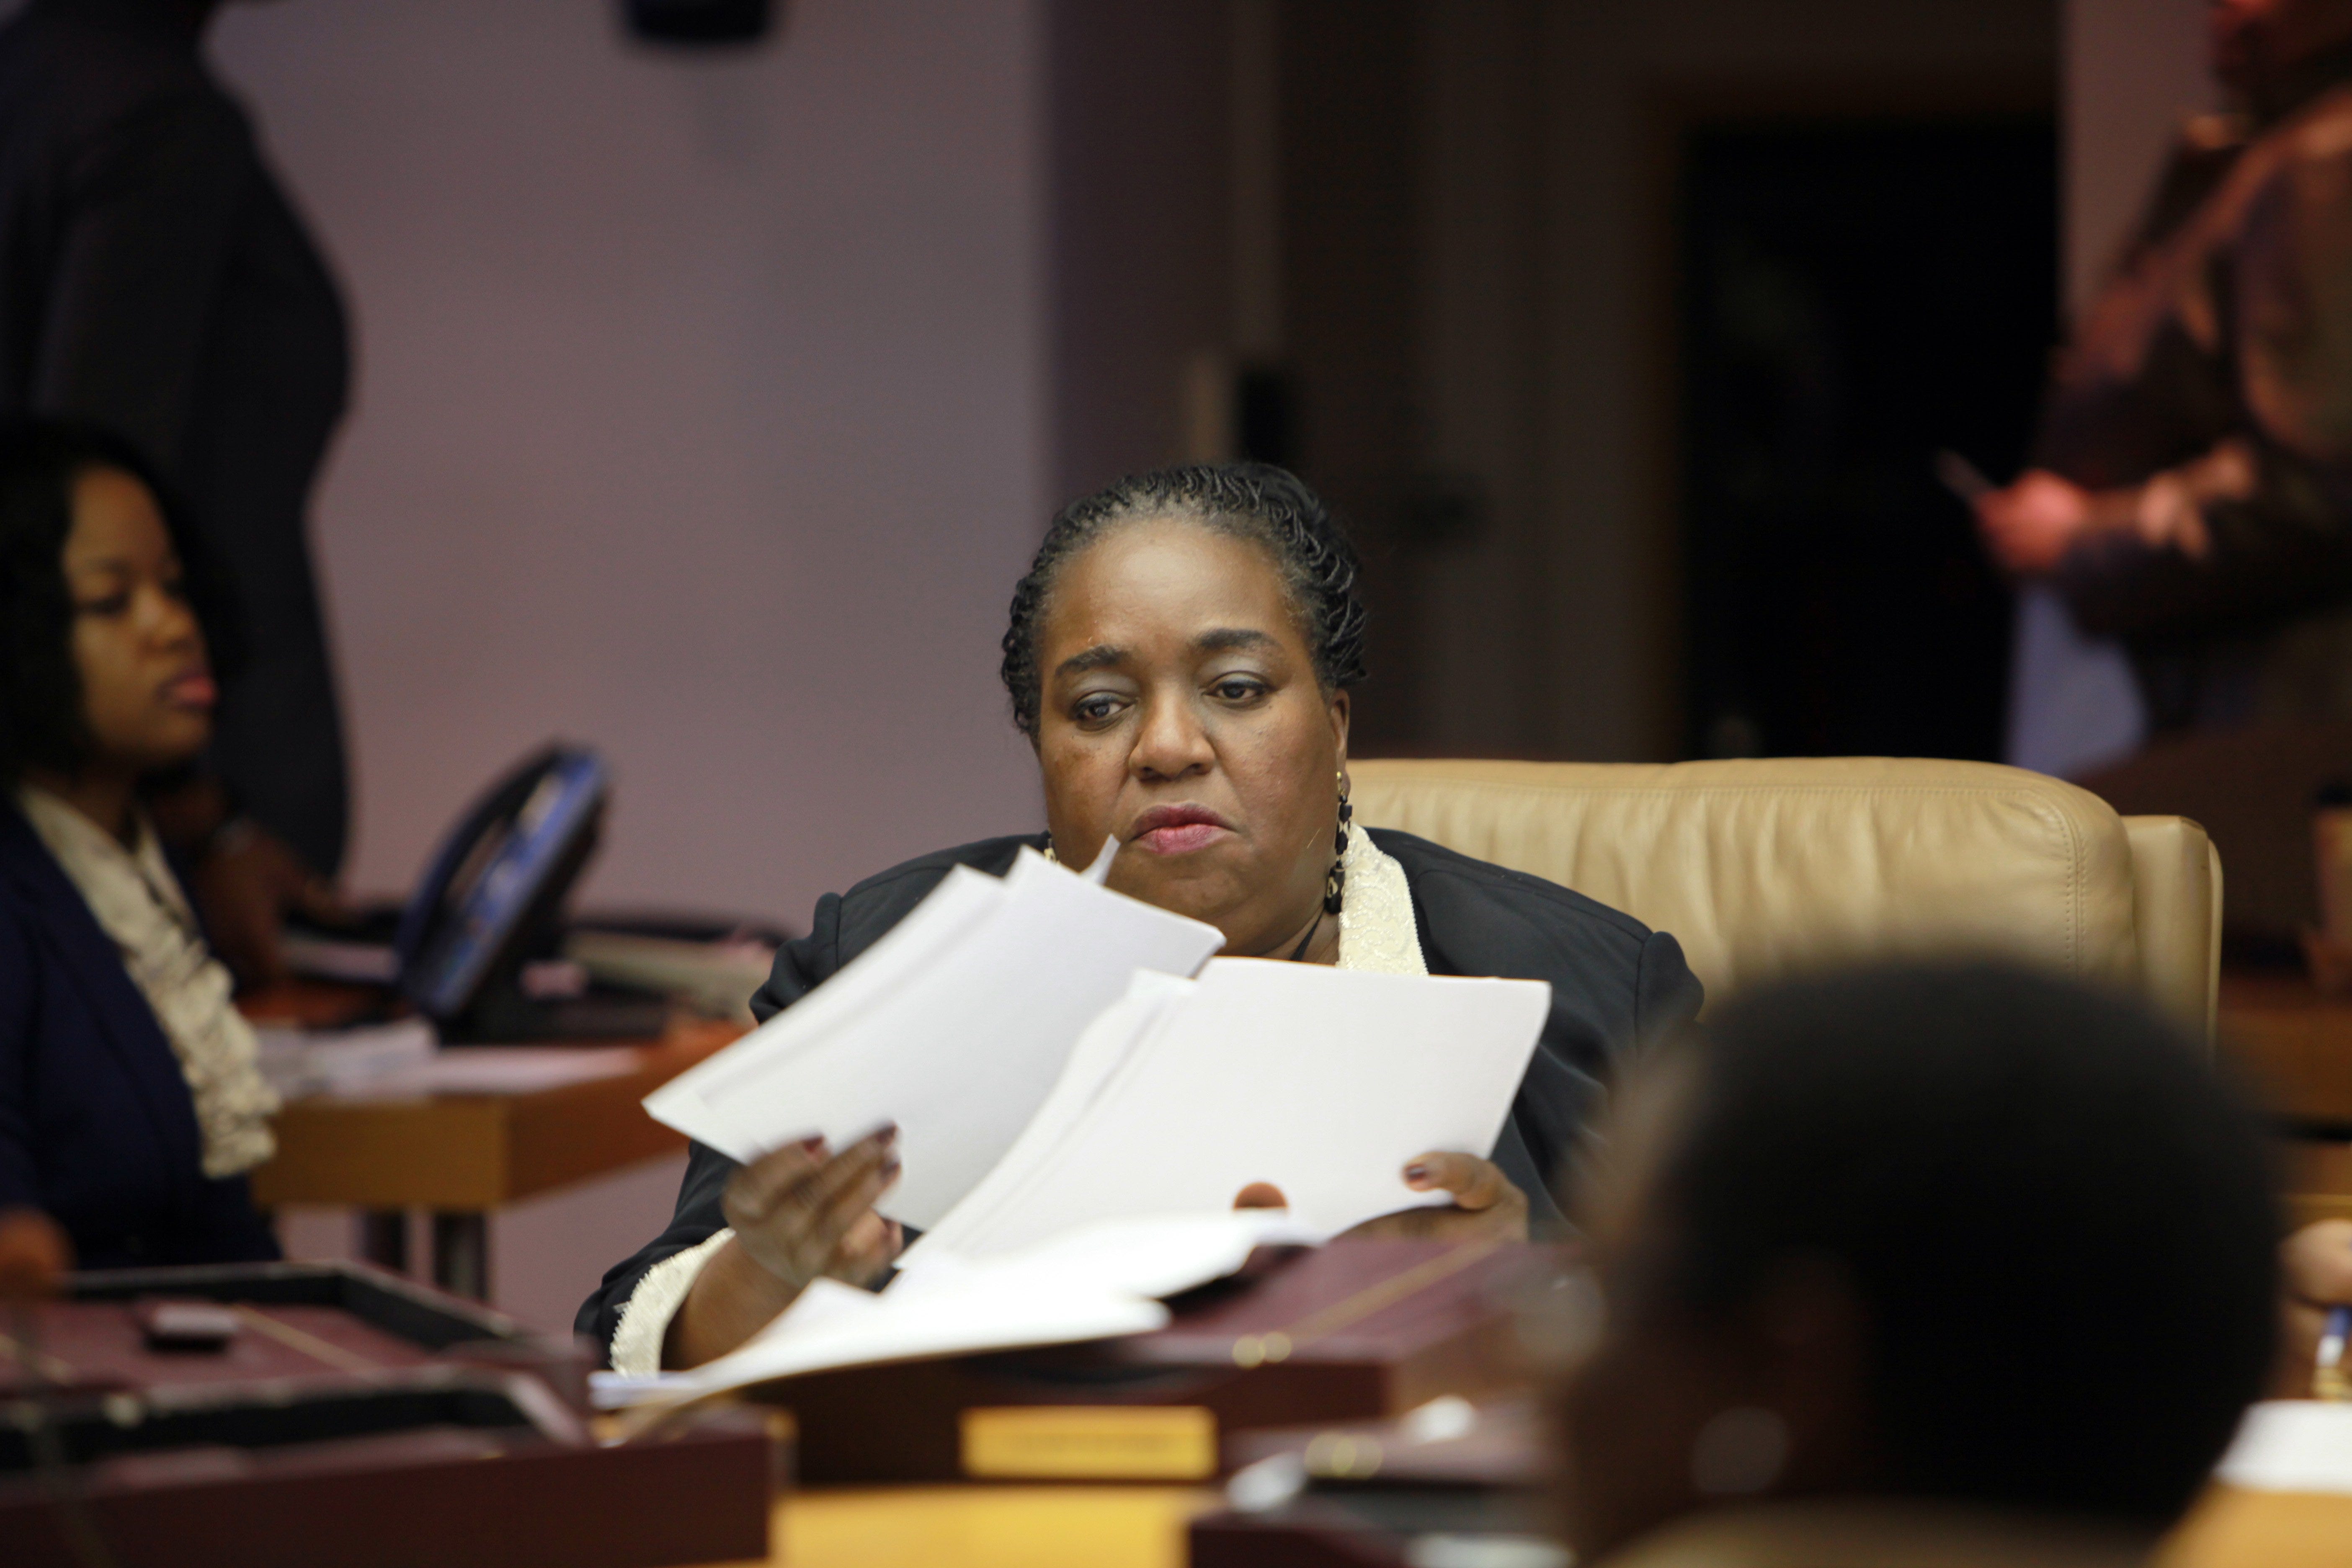 Councilwoman JoAnn Watson goes over some papers before casting her 'no vote" against borrowing $137 million bond money to help the city through its cash flow crisis. during a city council meeting on March 27, 2012.